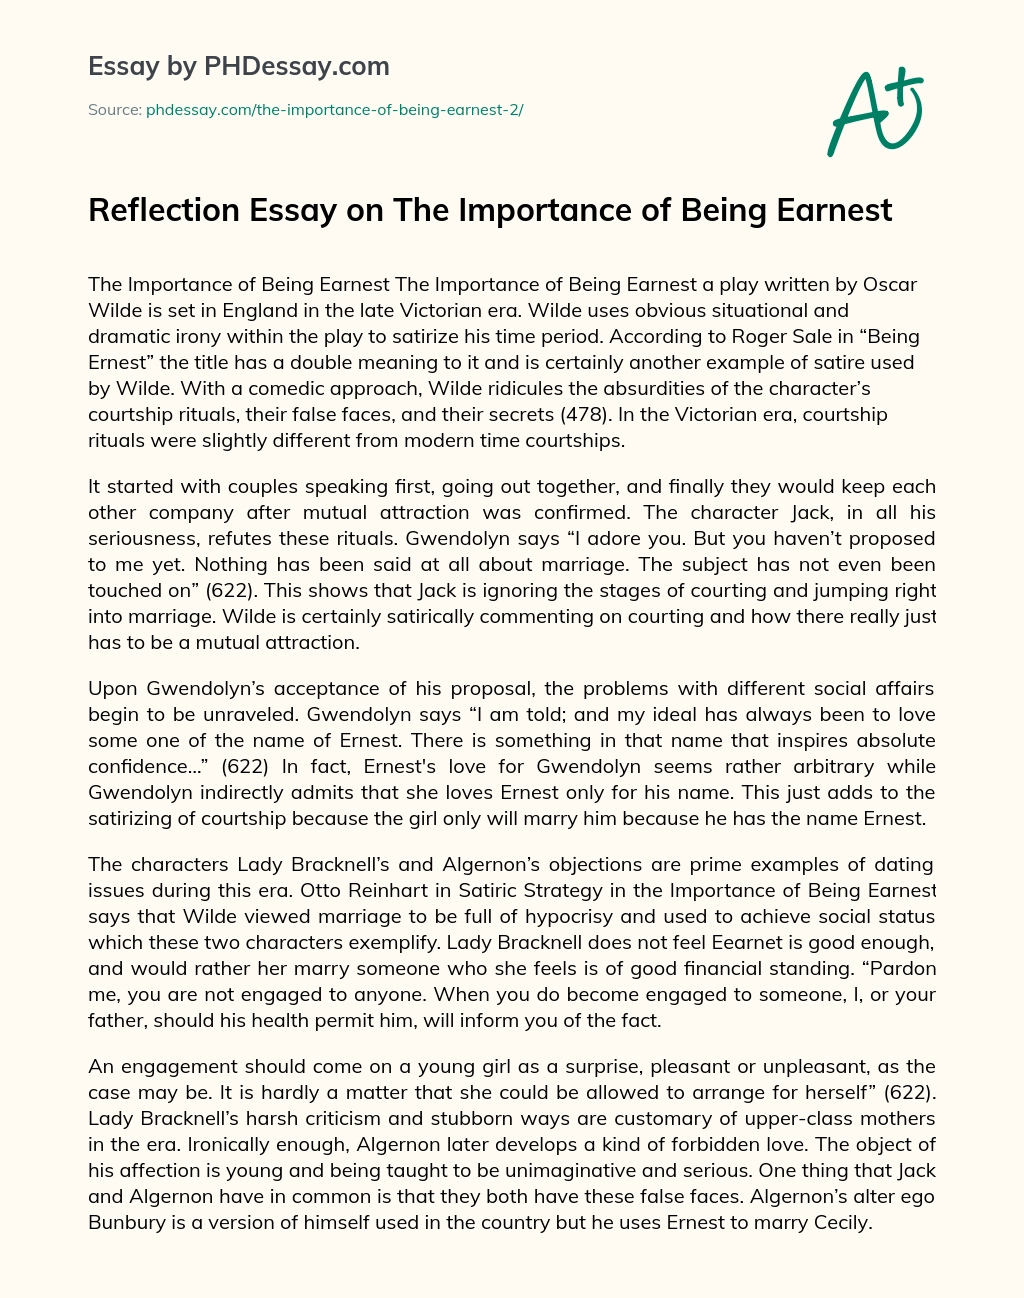 Reflection Essay on The Importance of Being Earnest essay